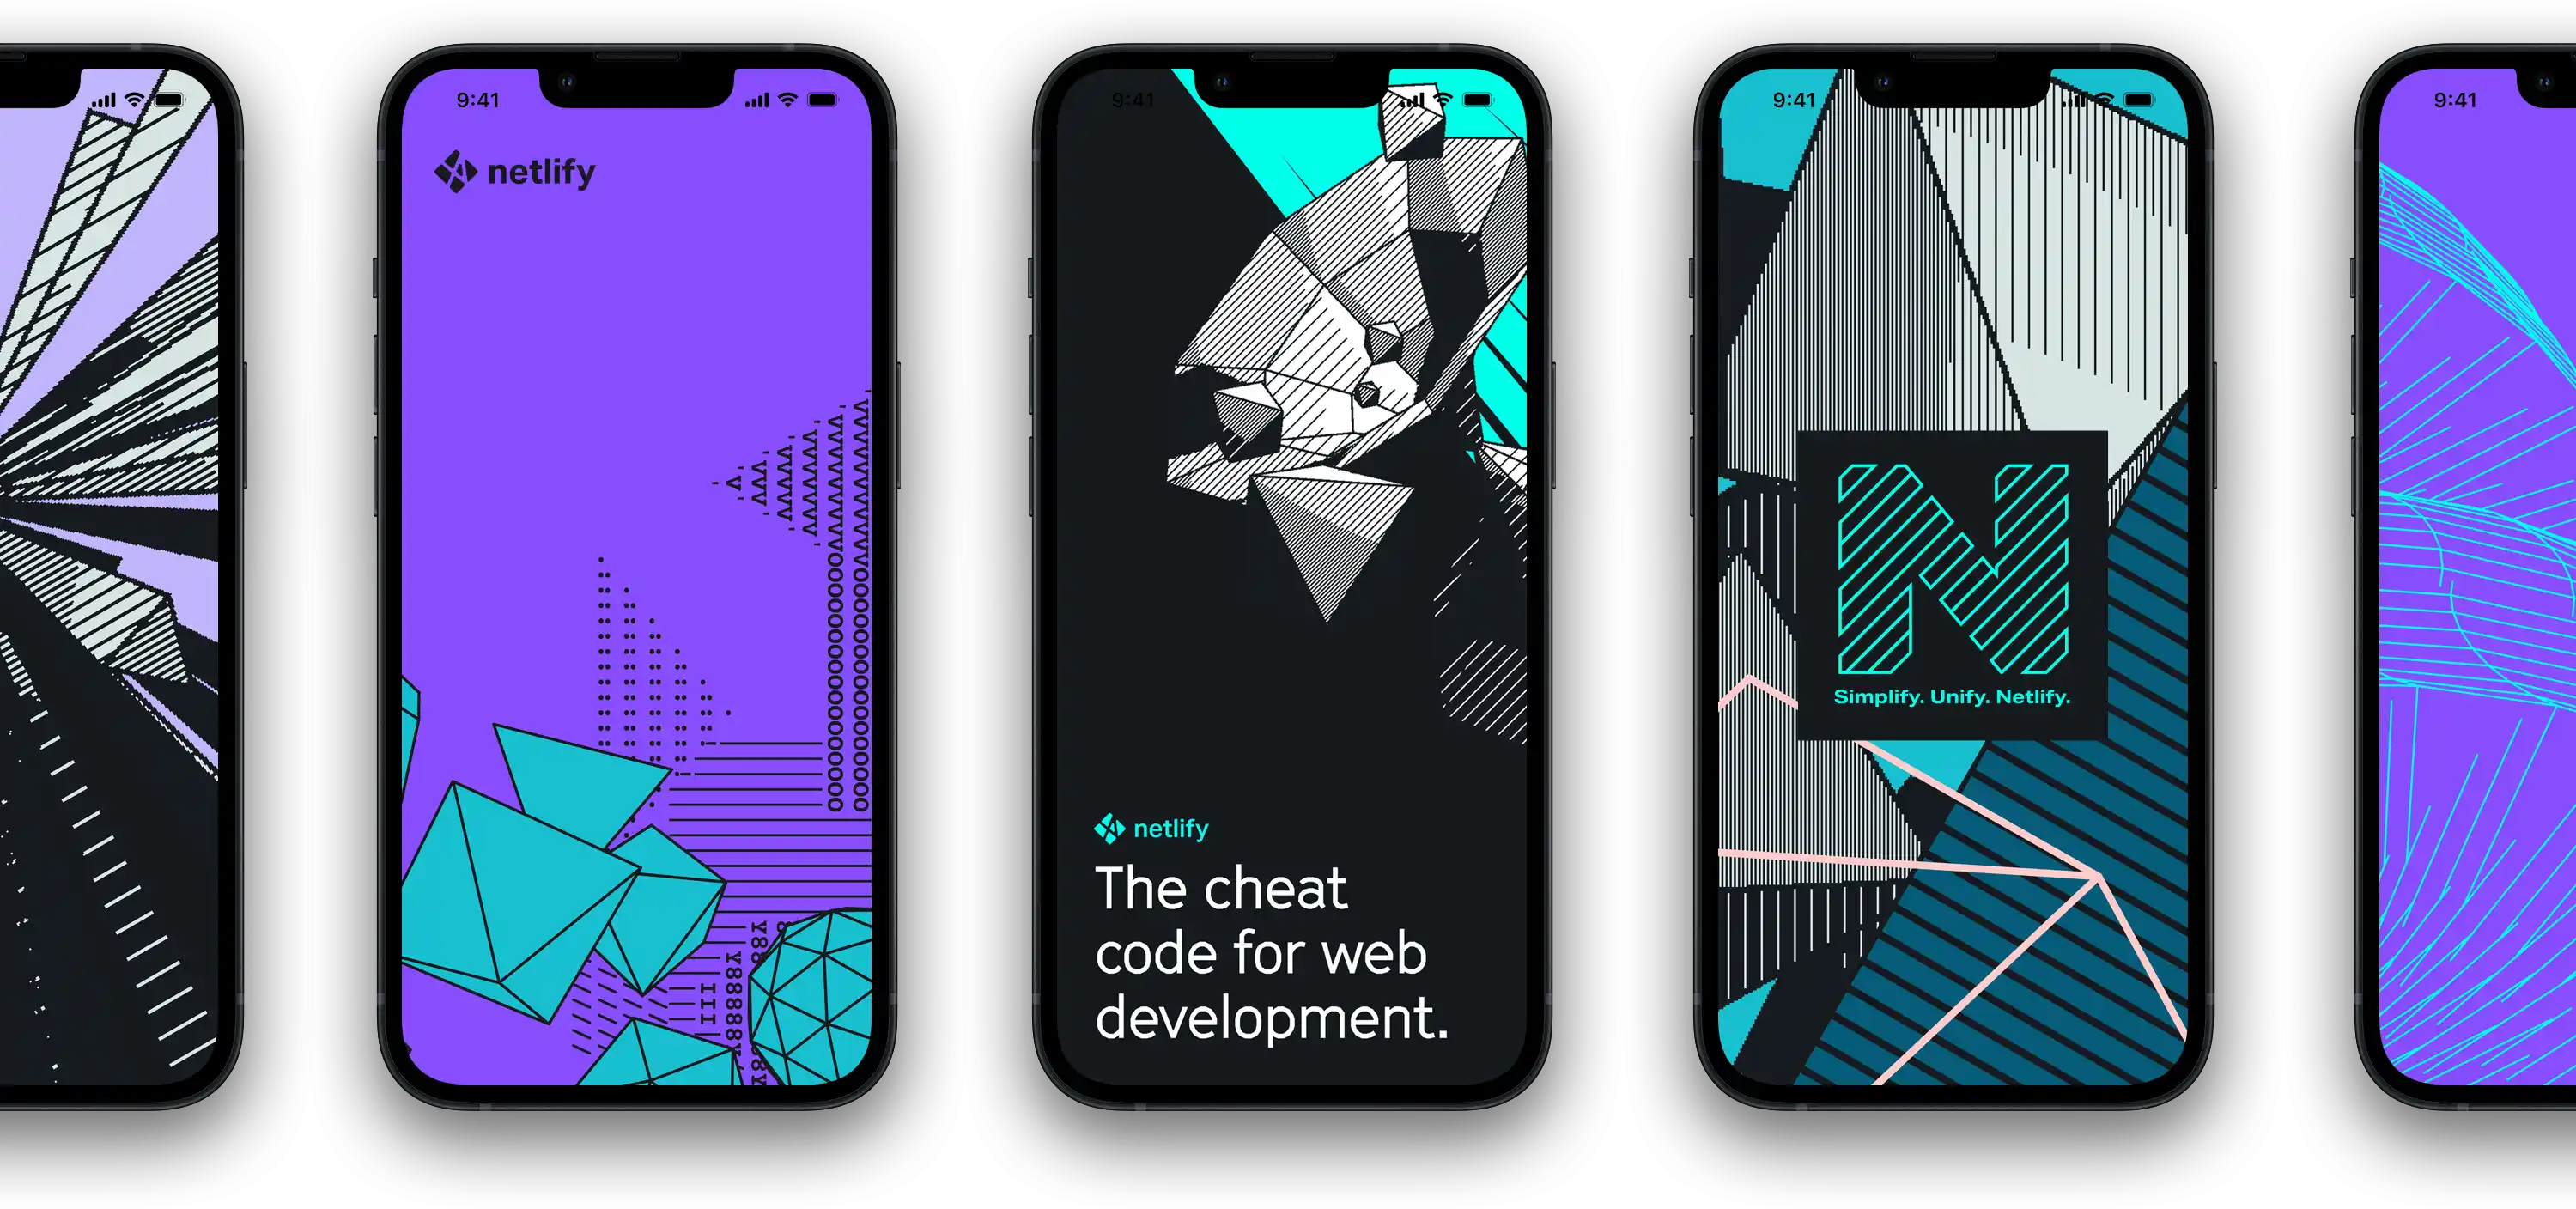 multiple iphones that all show different Netlify graphics